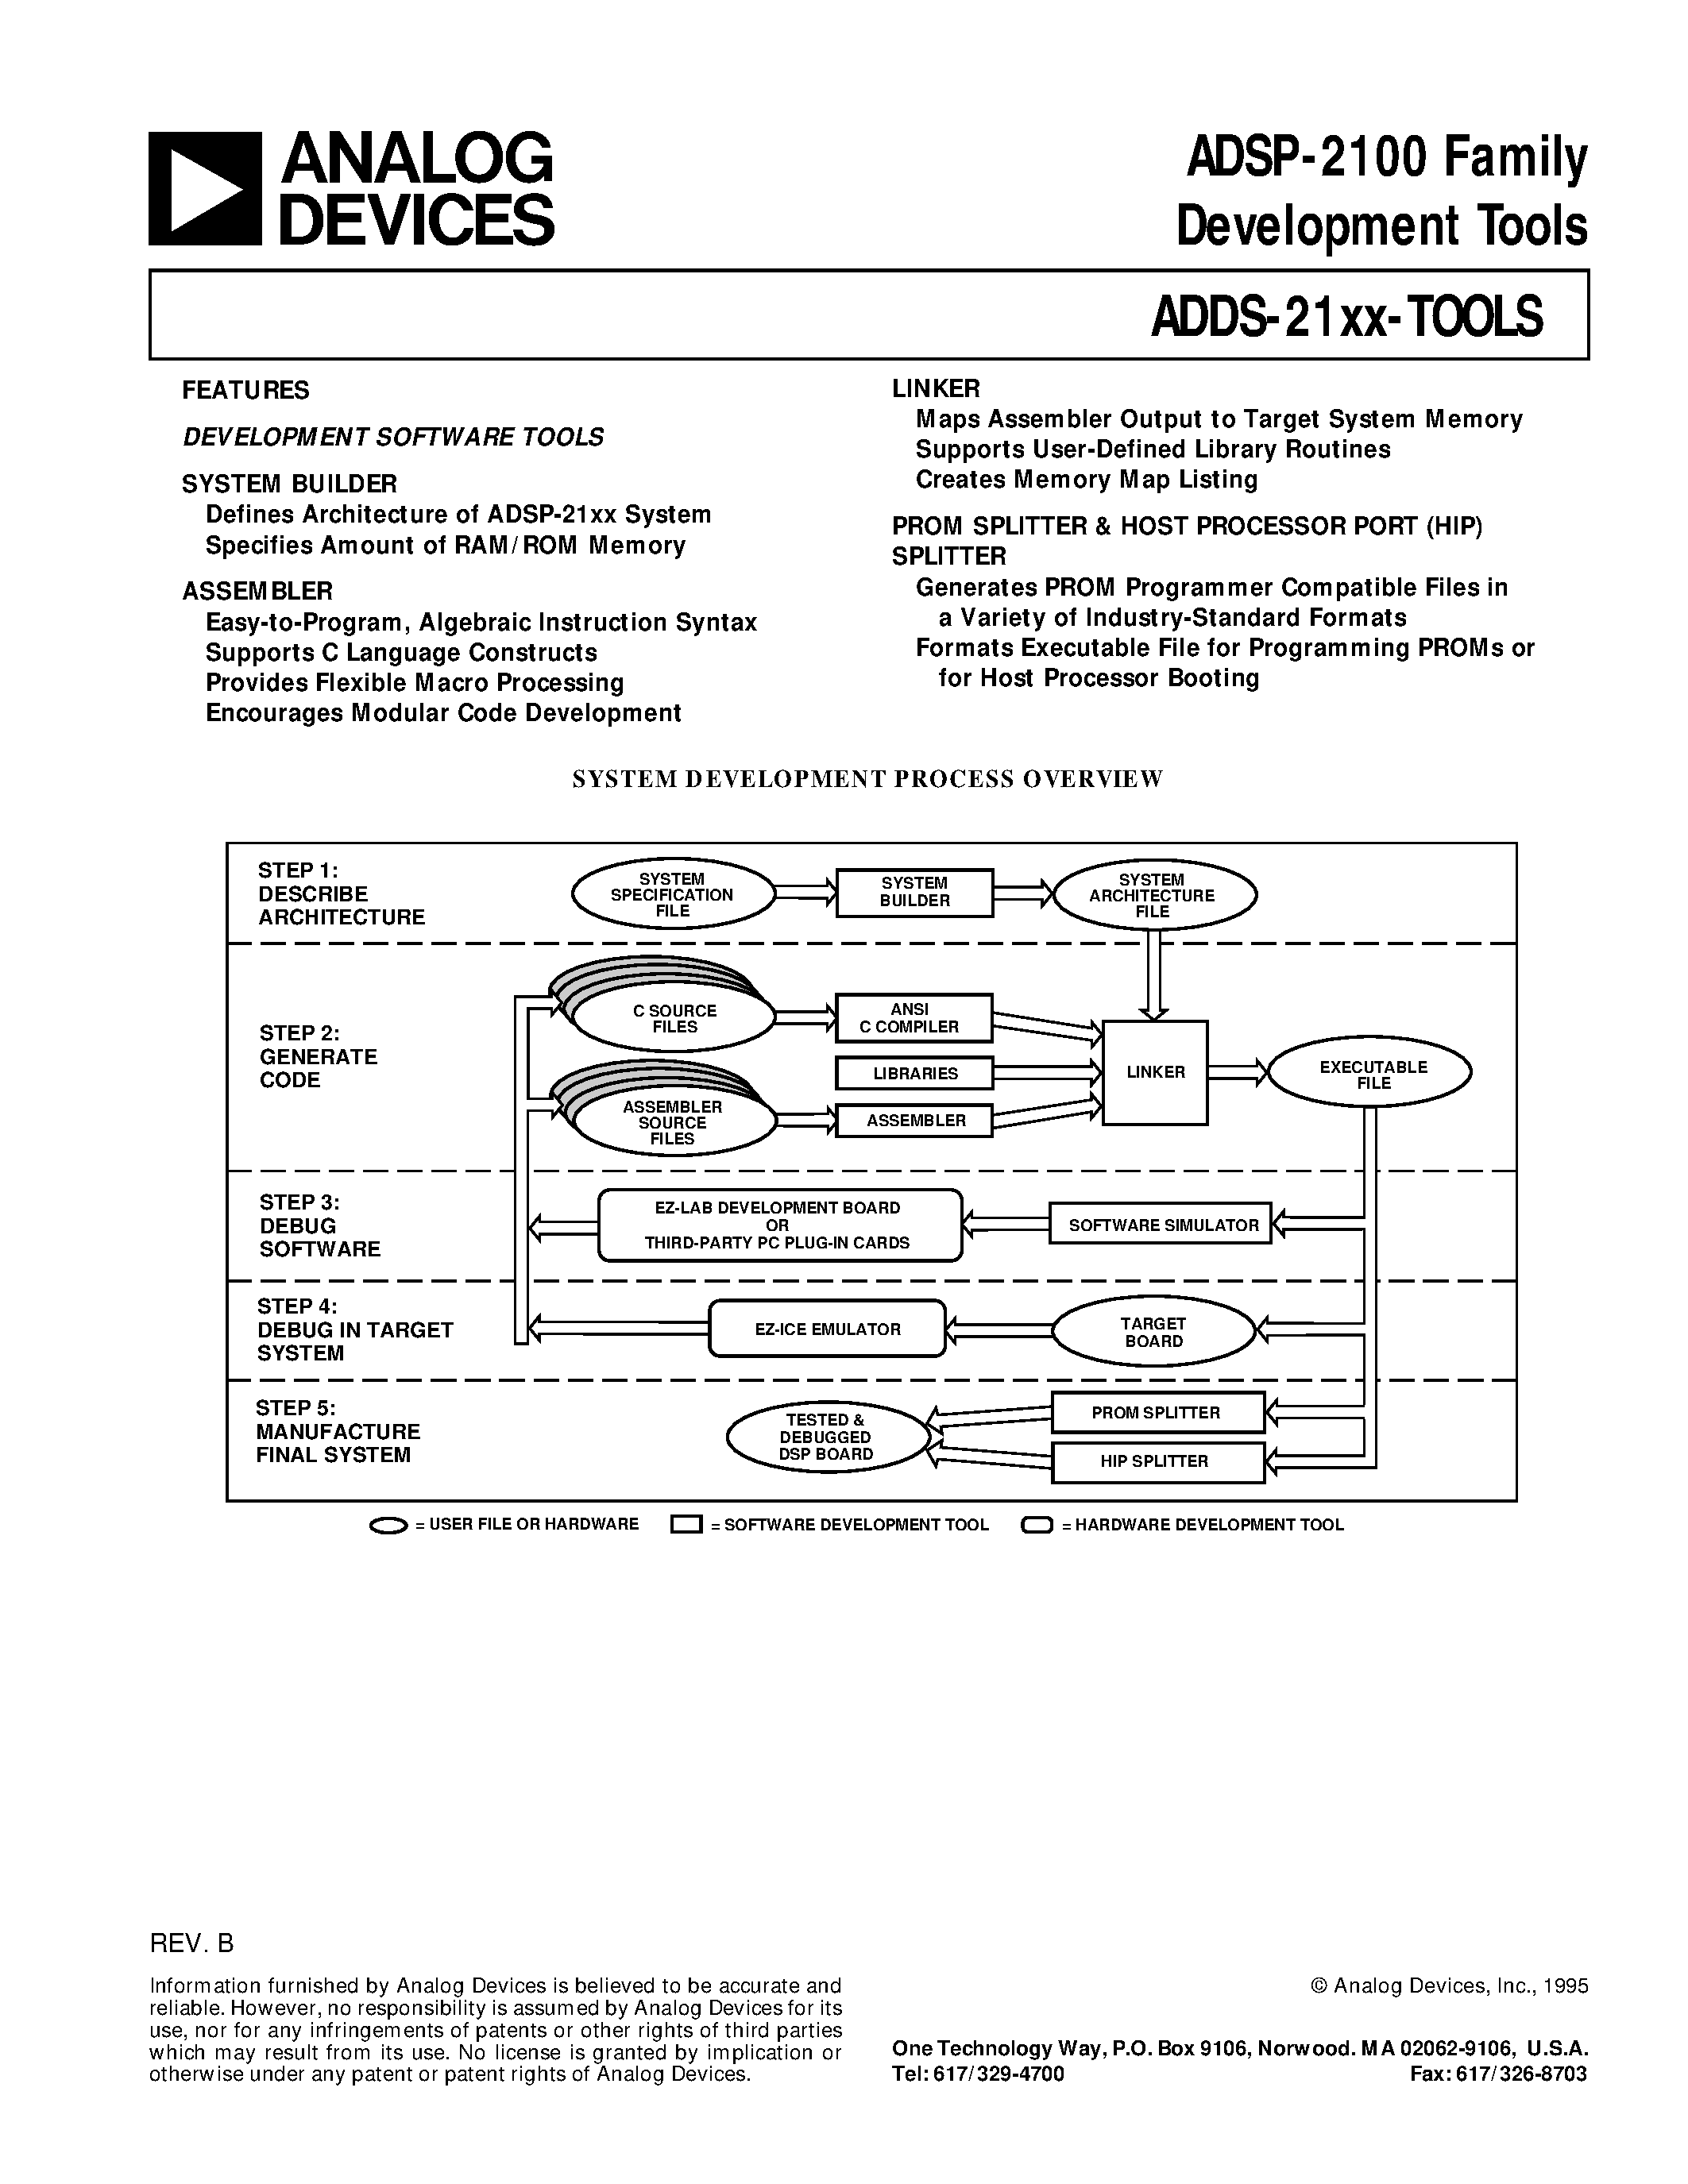 Datasheet ADDS-2111-EZ-ICE - ADSP-2100 Family Development Tools page 1